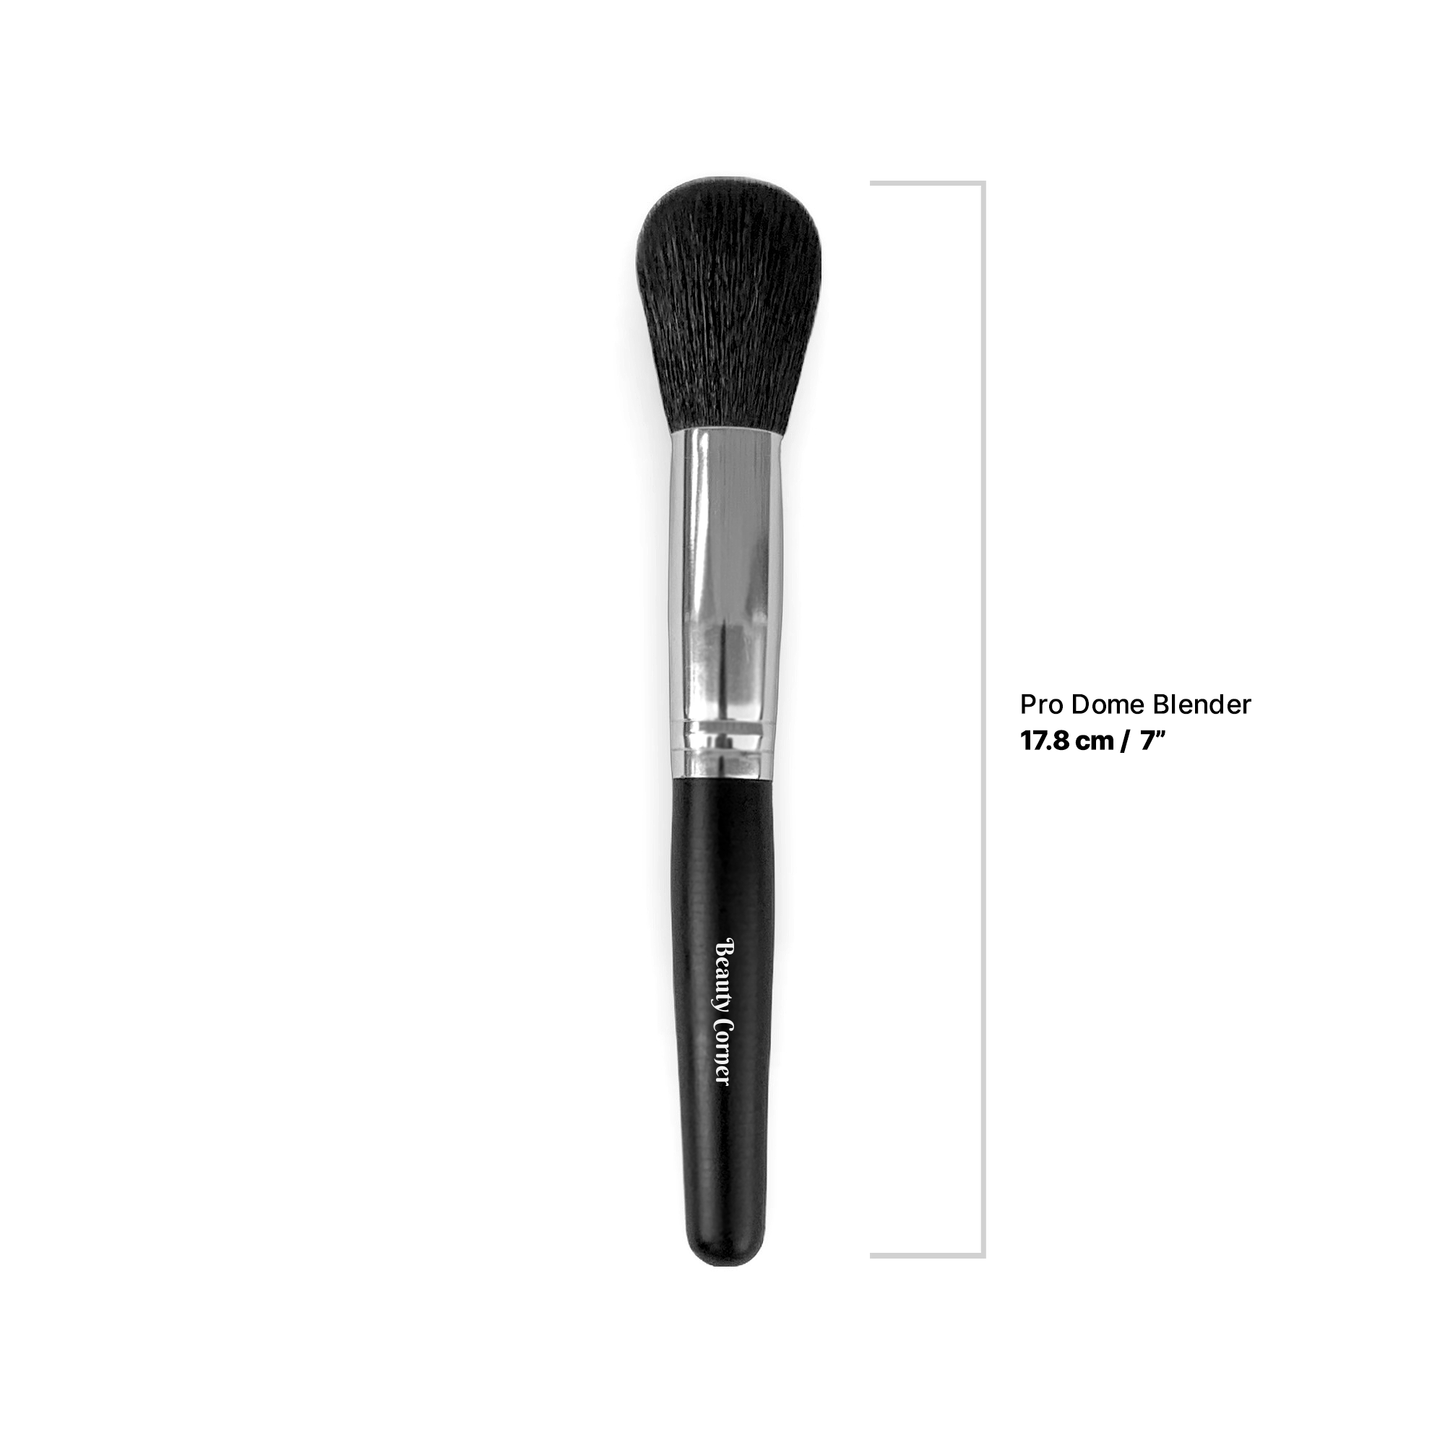 "Blush Brush - Ethically Manufactured, Eco-Friendly Design, 100% Synthetic Fibers for Superior Performance and Durability"